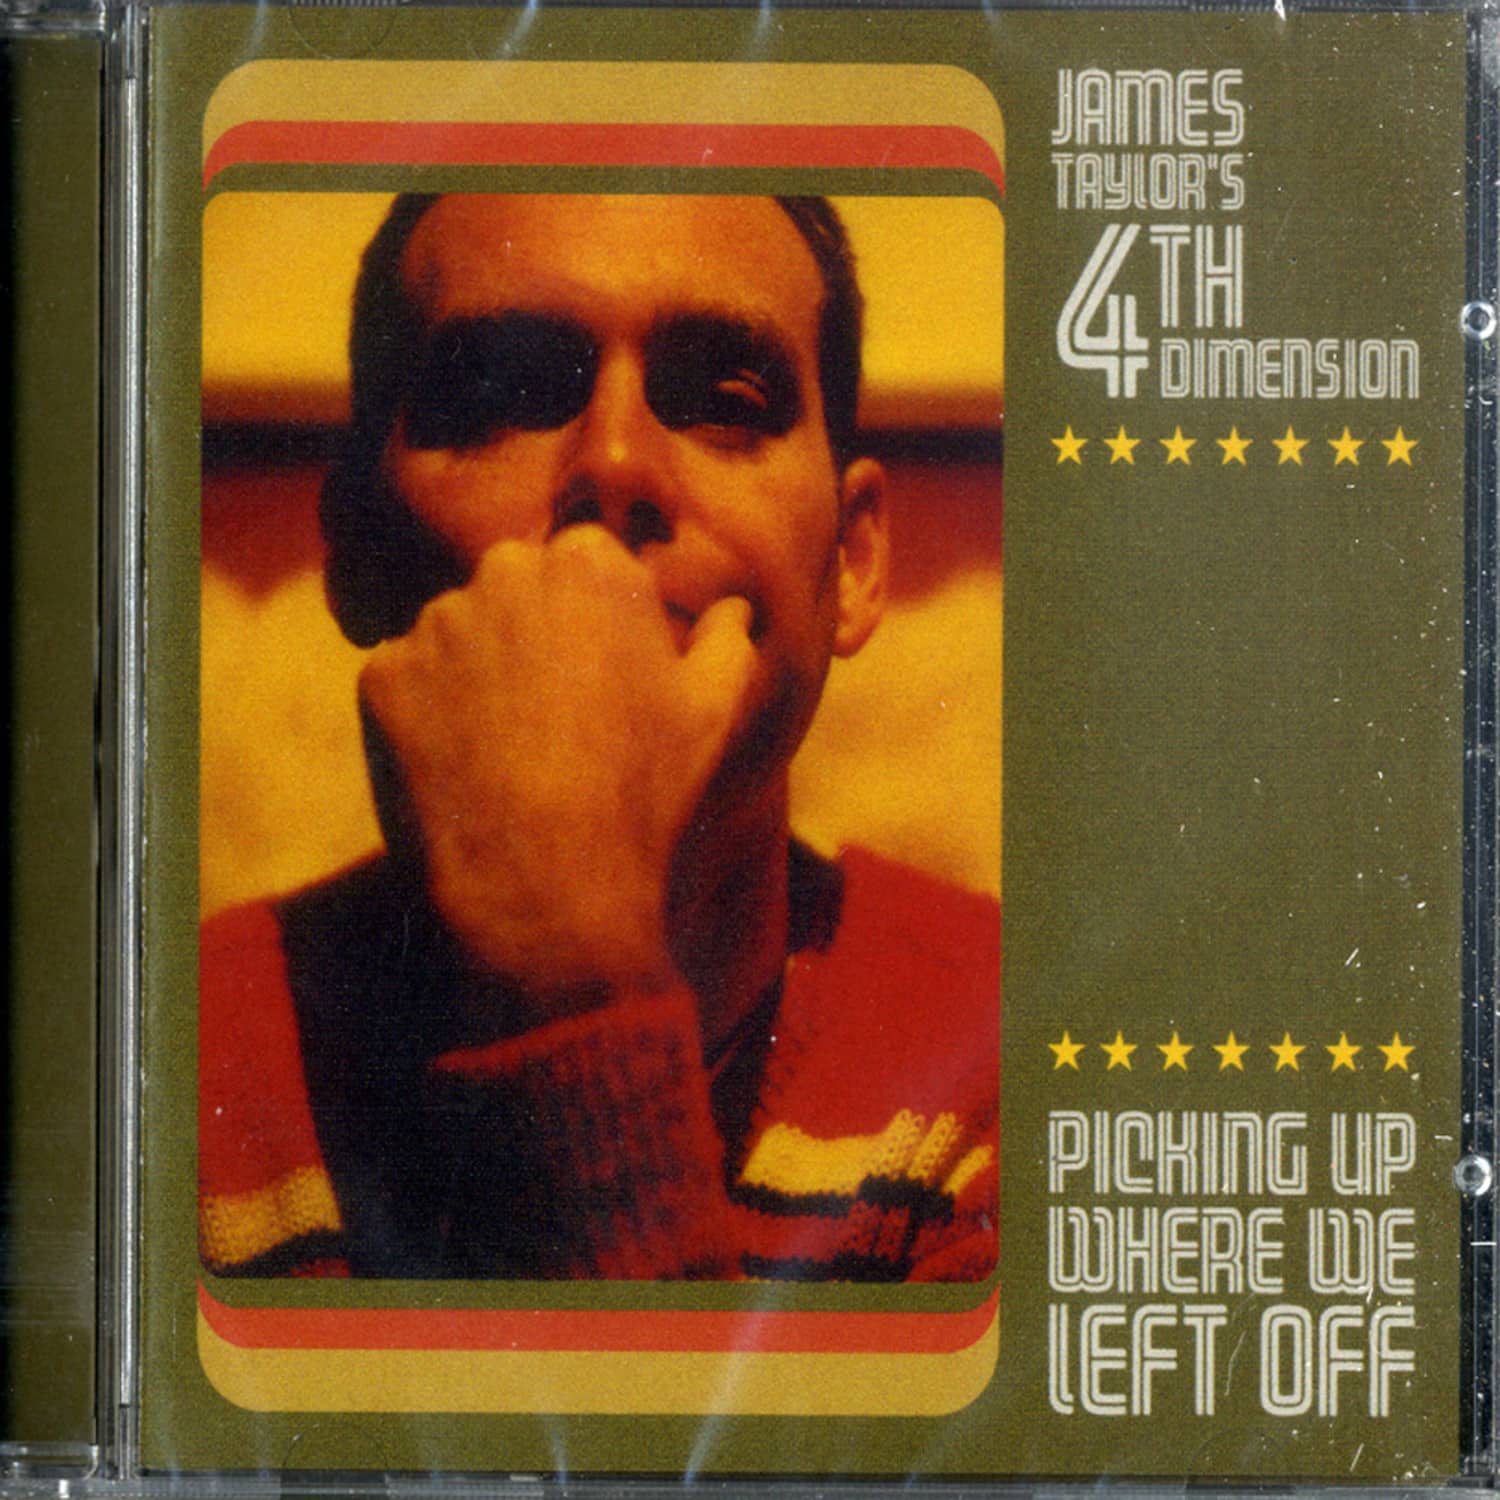 James Taylors 4th Dimension - PICKING UP WHERE WE LEFT OFF 